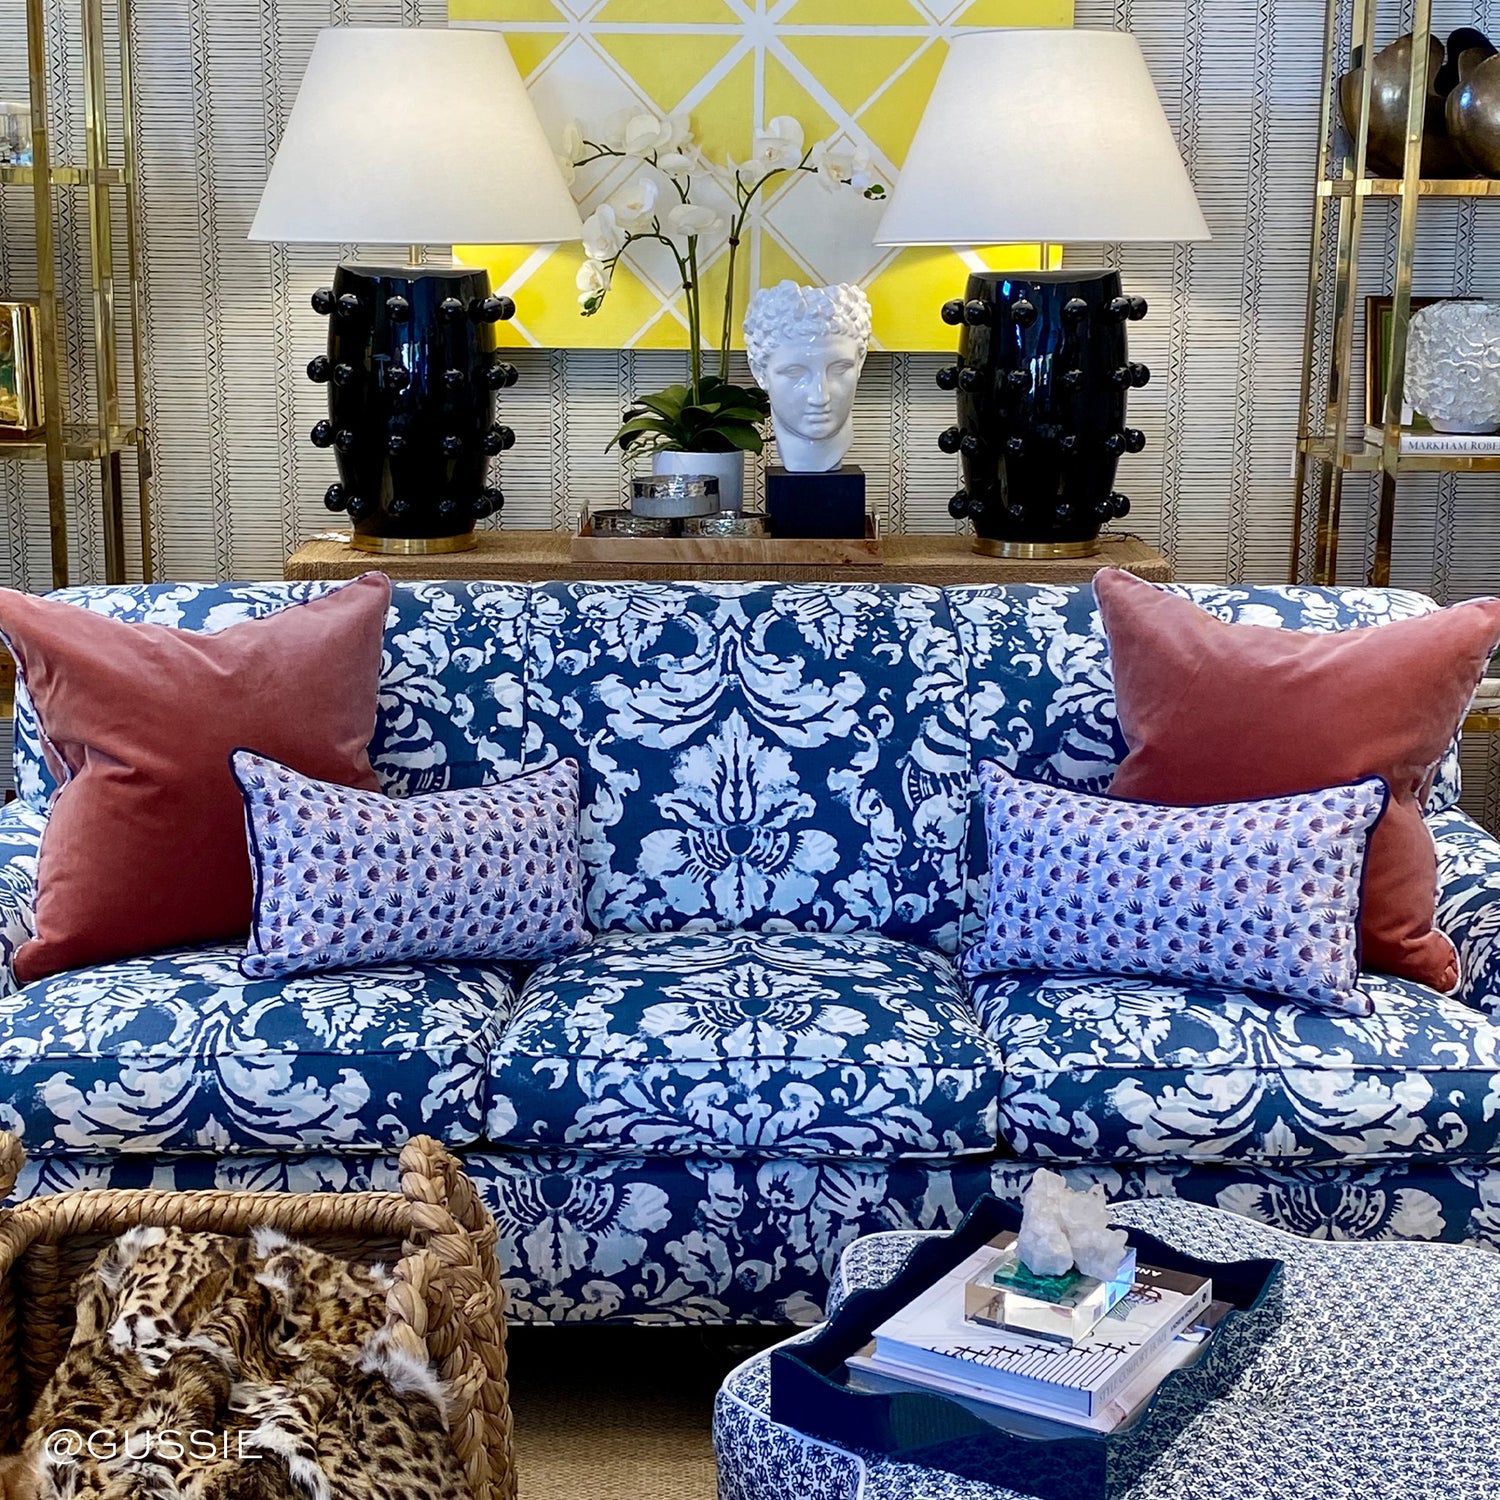 Living room styled with coral velvet pillows and two red and blue printed lumbars on blue printed couch under two black and white lamps with home decorations. Photo taken by Gussie